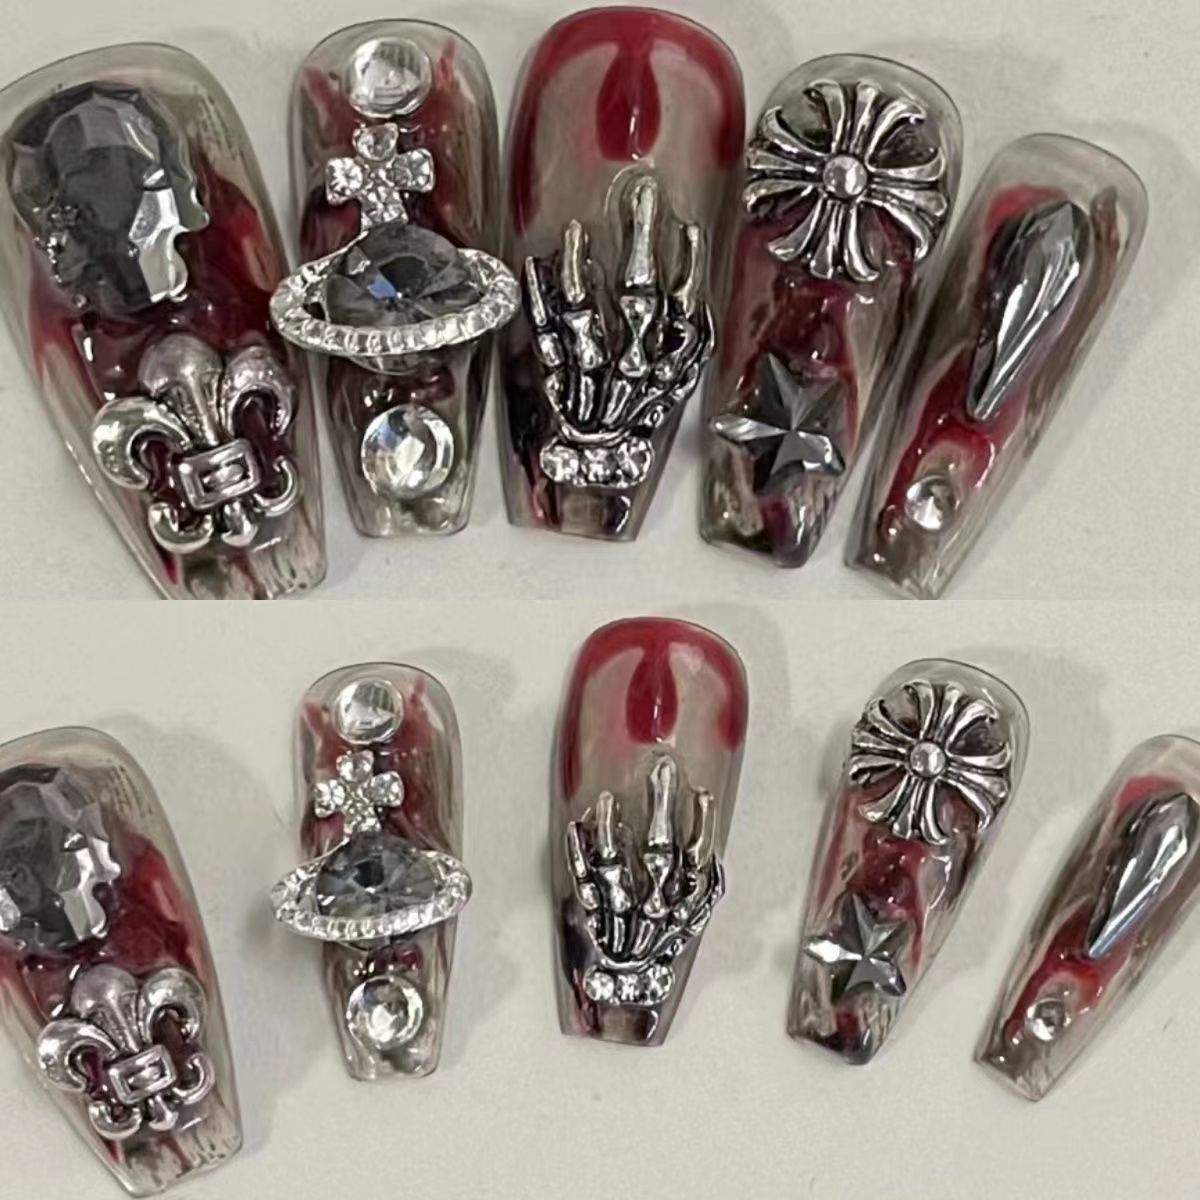 Handmade nail patch wear nail patch finished nail stickers blood sacrifice skull claw punk Crocodile Spice Girls dark series